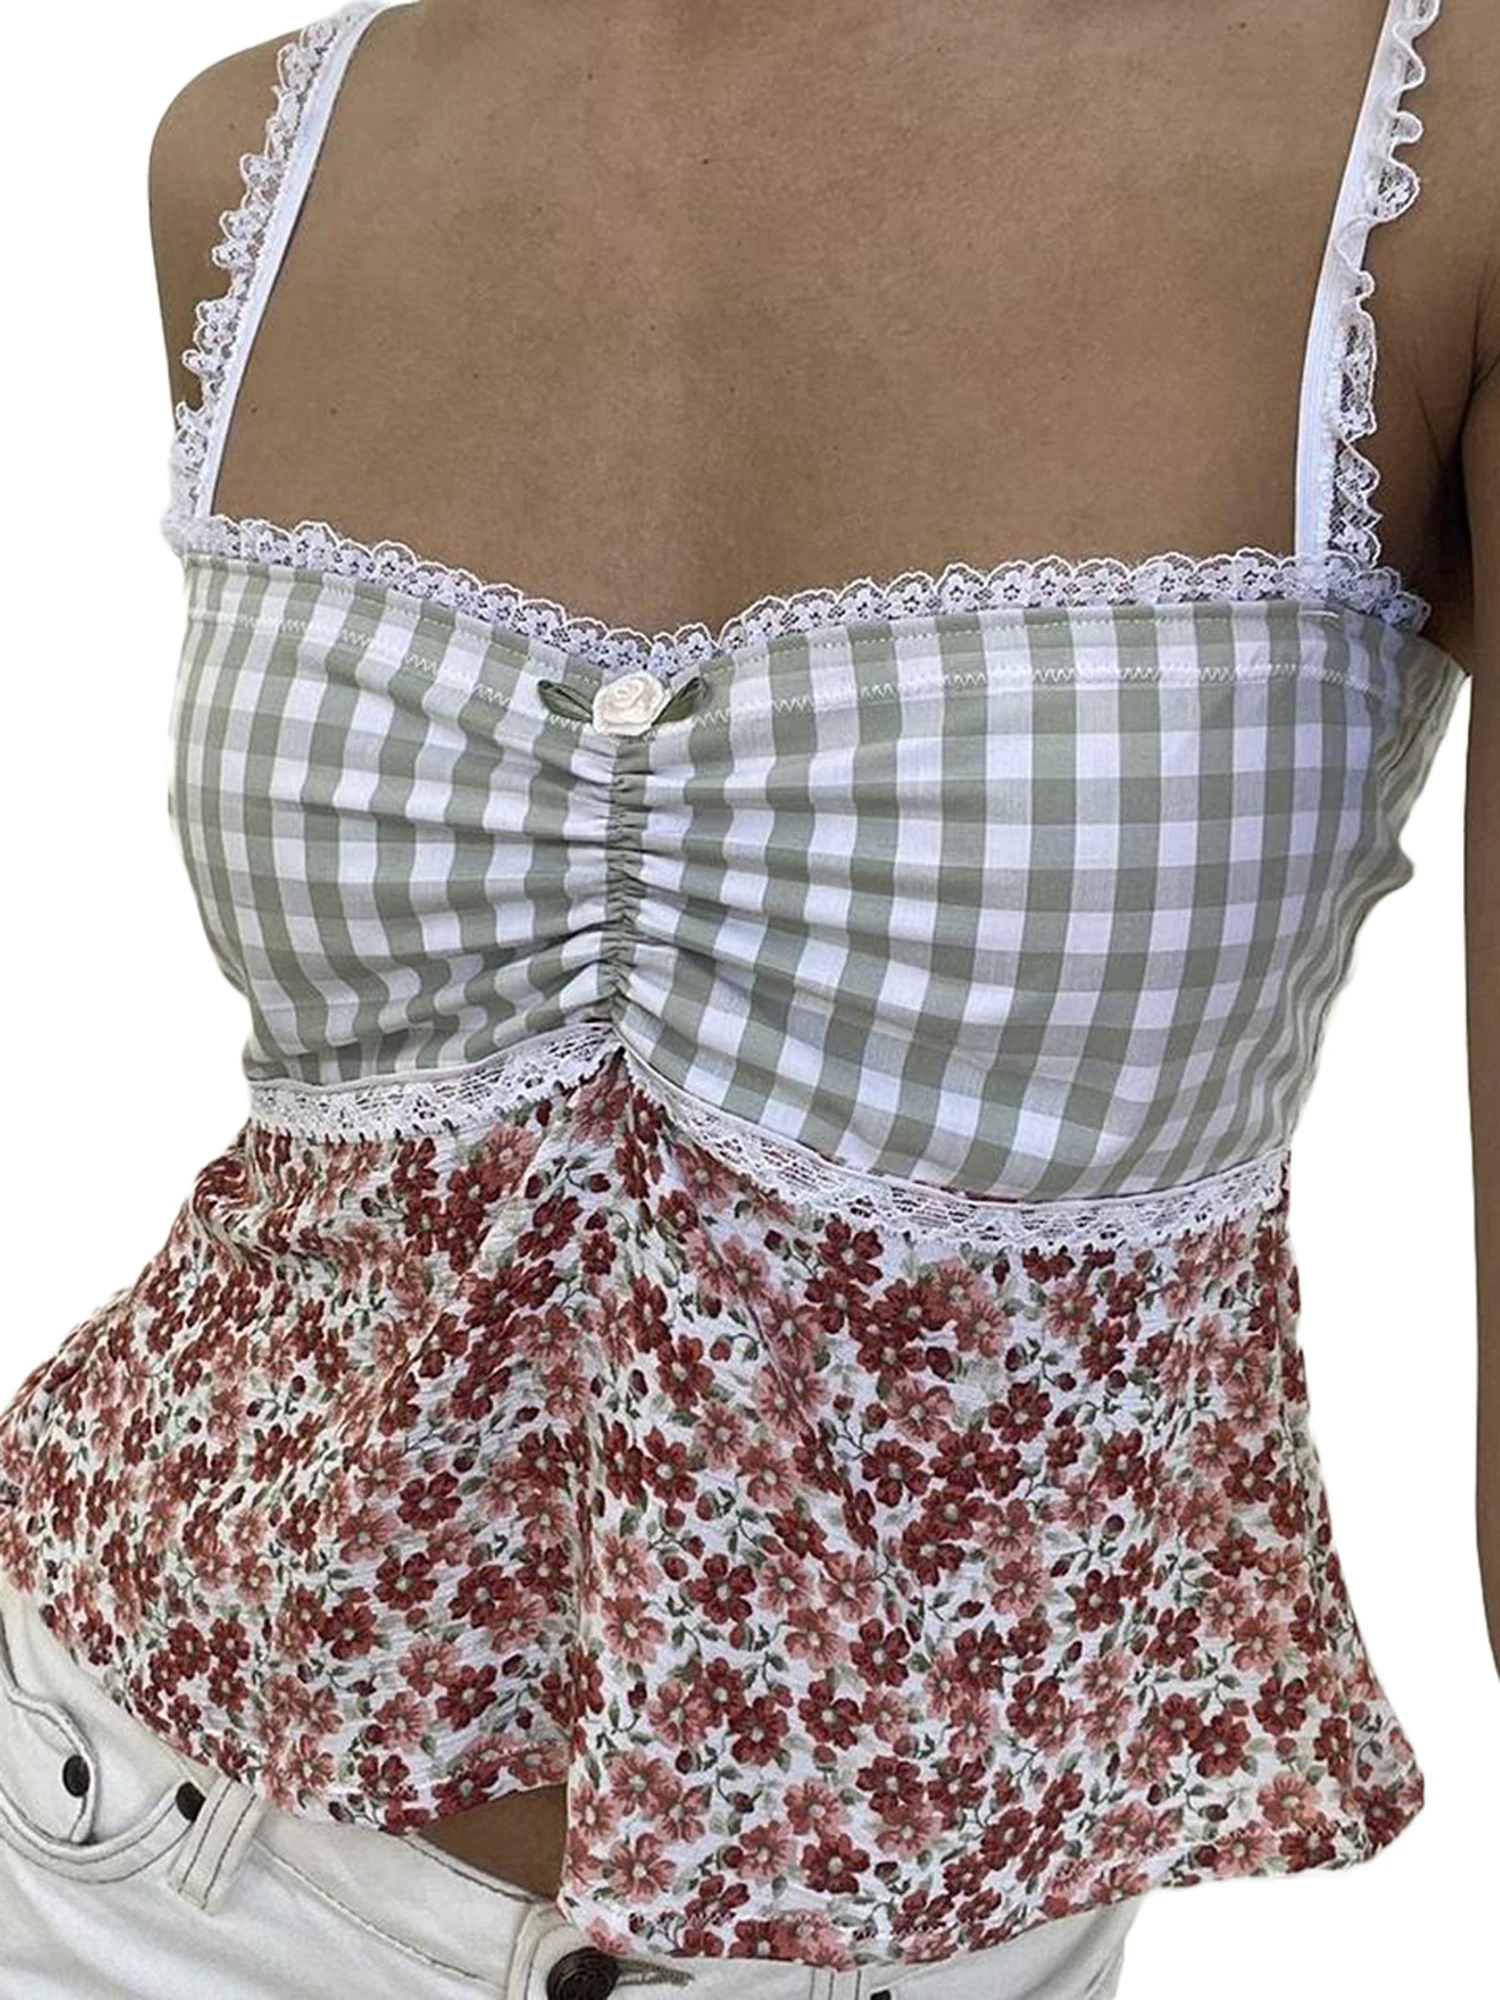 

Retro-Inspired Floral Crop Top with Square Neckline Spaghetti Straps and Backless Design - Perfect for Aesthetic Outfits and